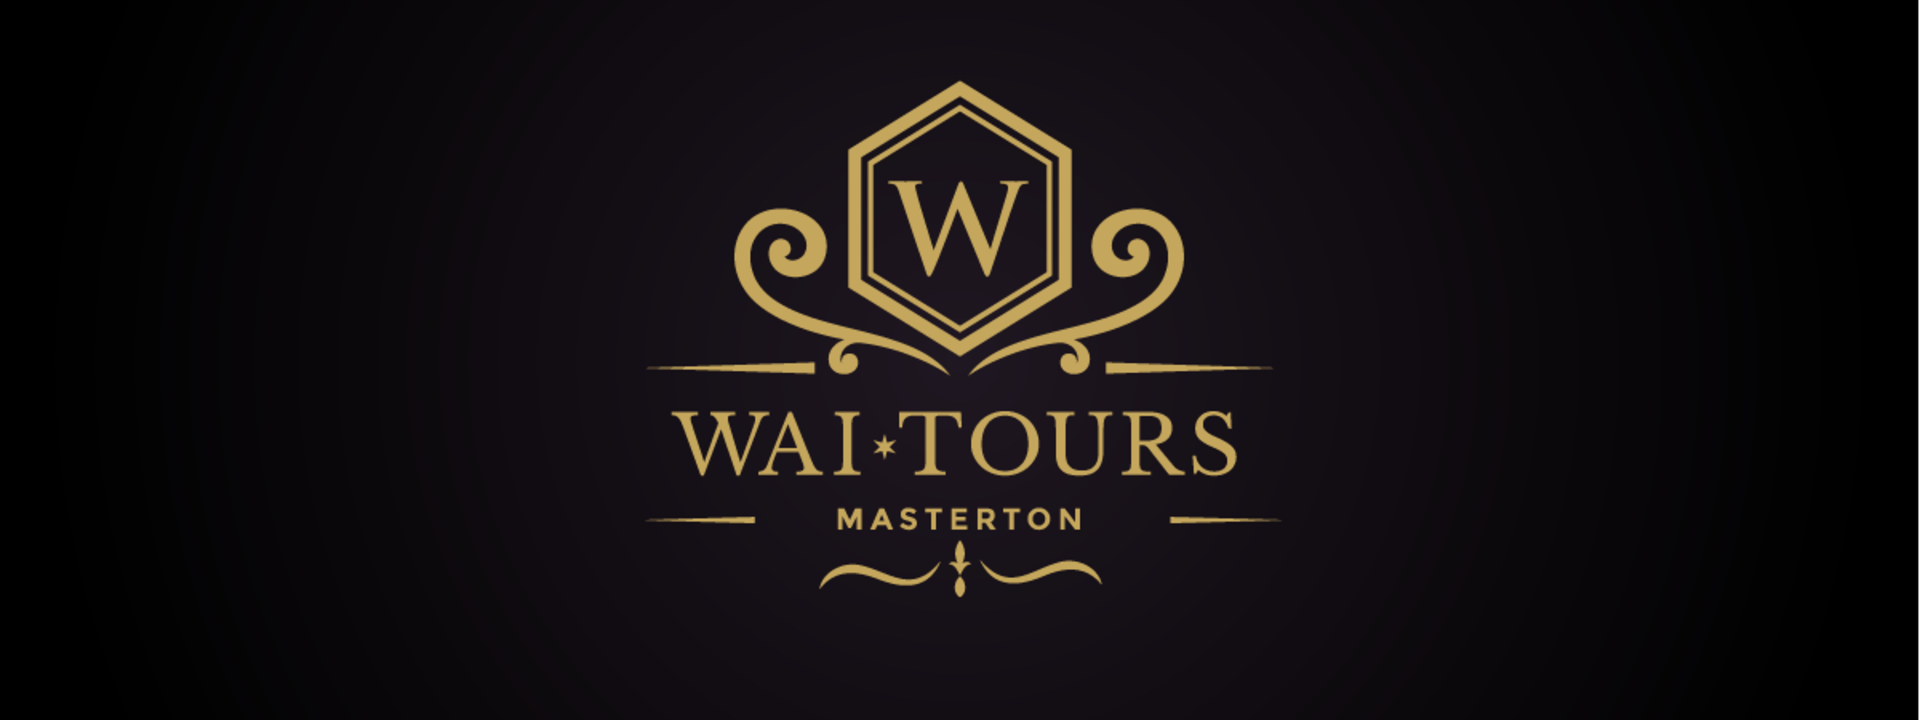 waitours-concept-full-logo_0.png